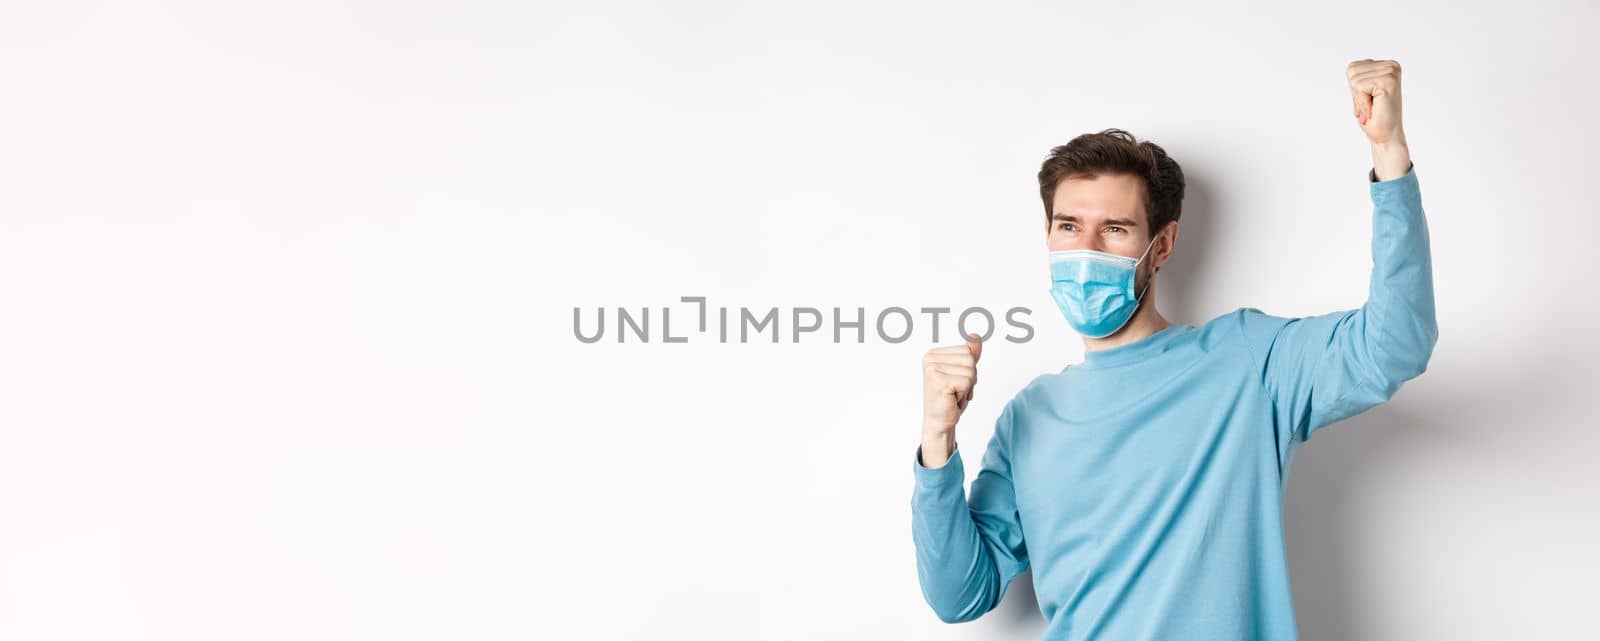 Covid-19, pandemic and social distancing concept. Happy man in medical mask watching sports game and cheering, raising hands up to celebrate, standing over white background.